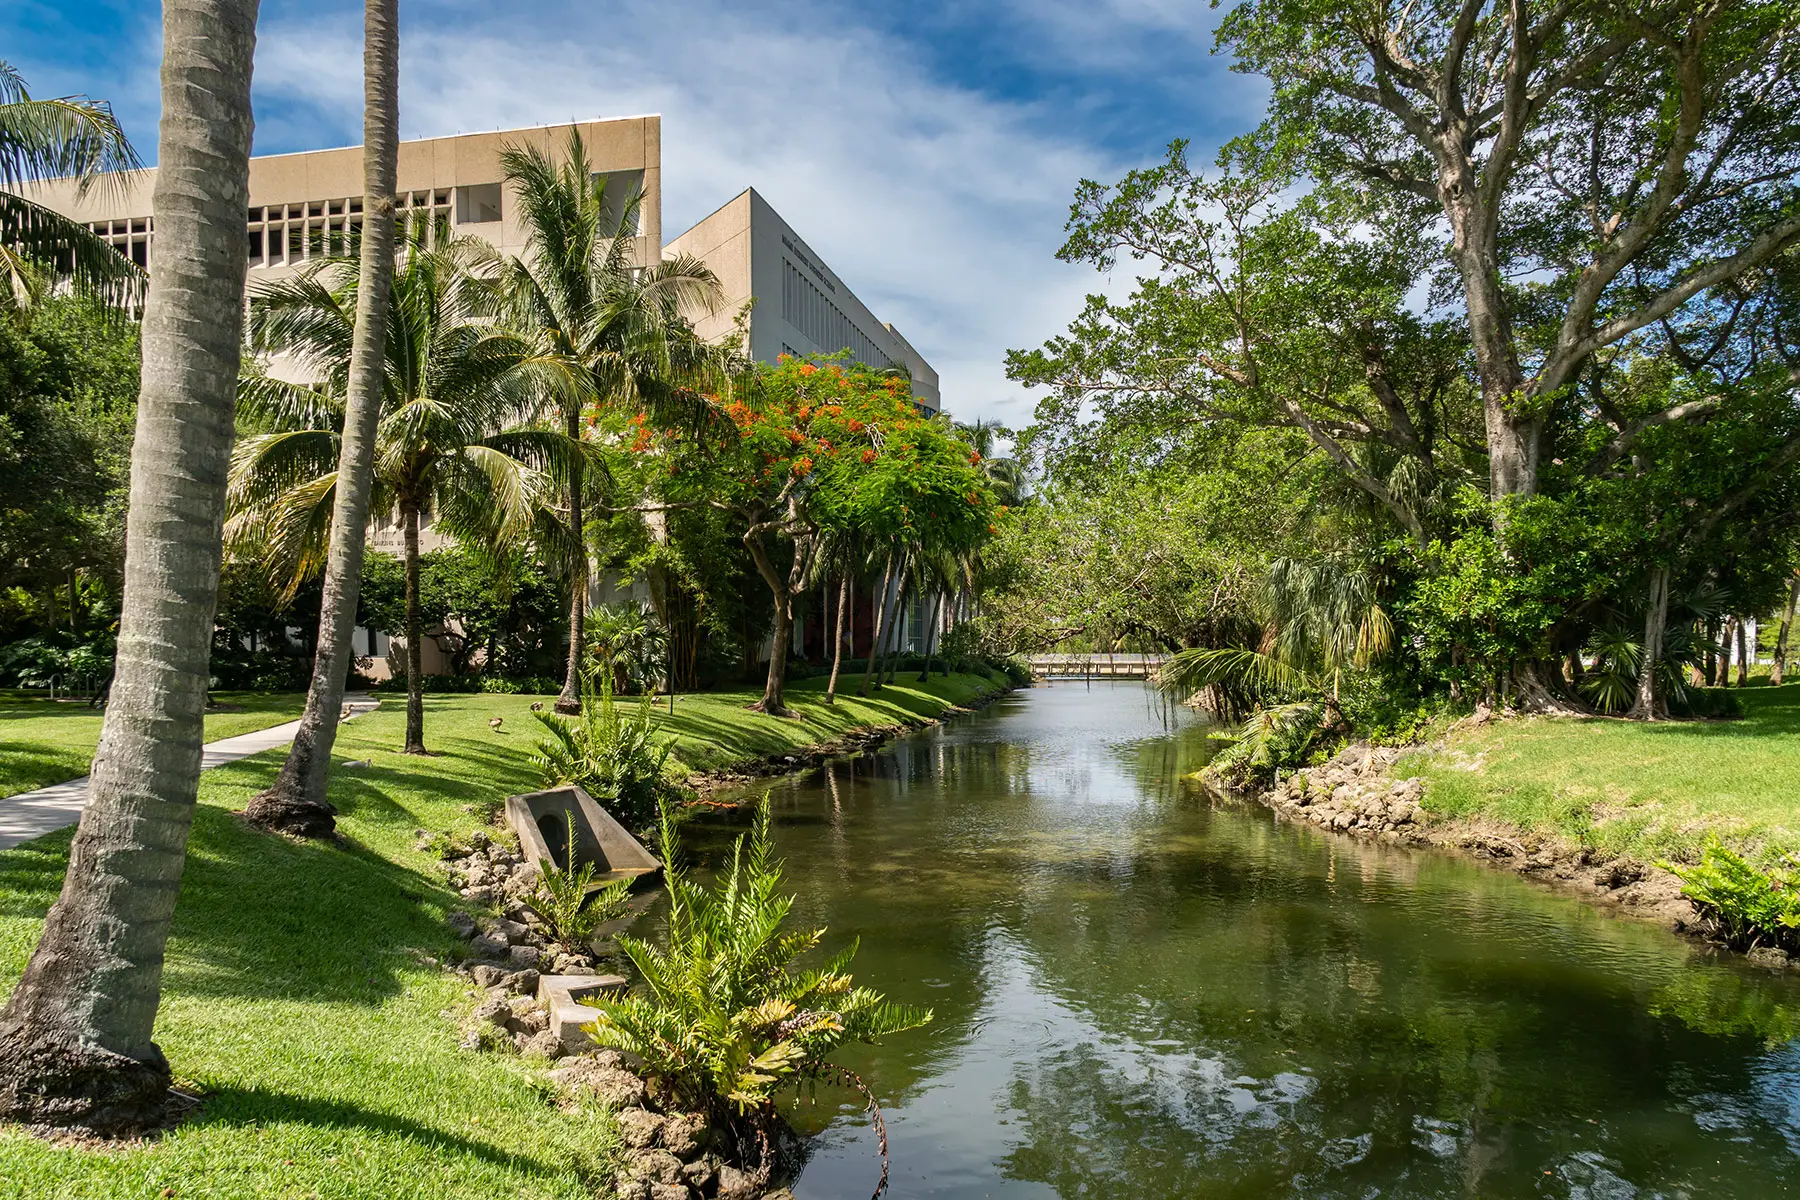 Outside a university building with a lake, greenery, and palm trees